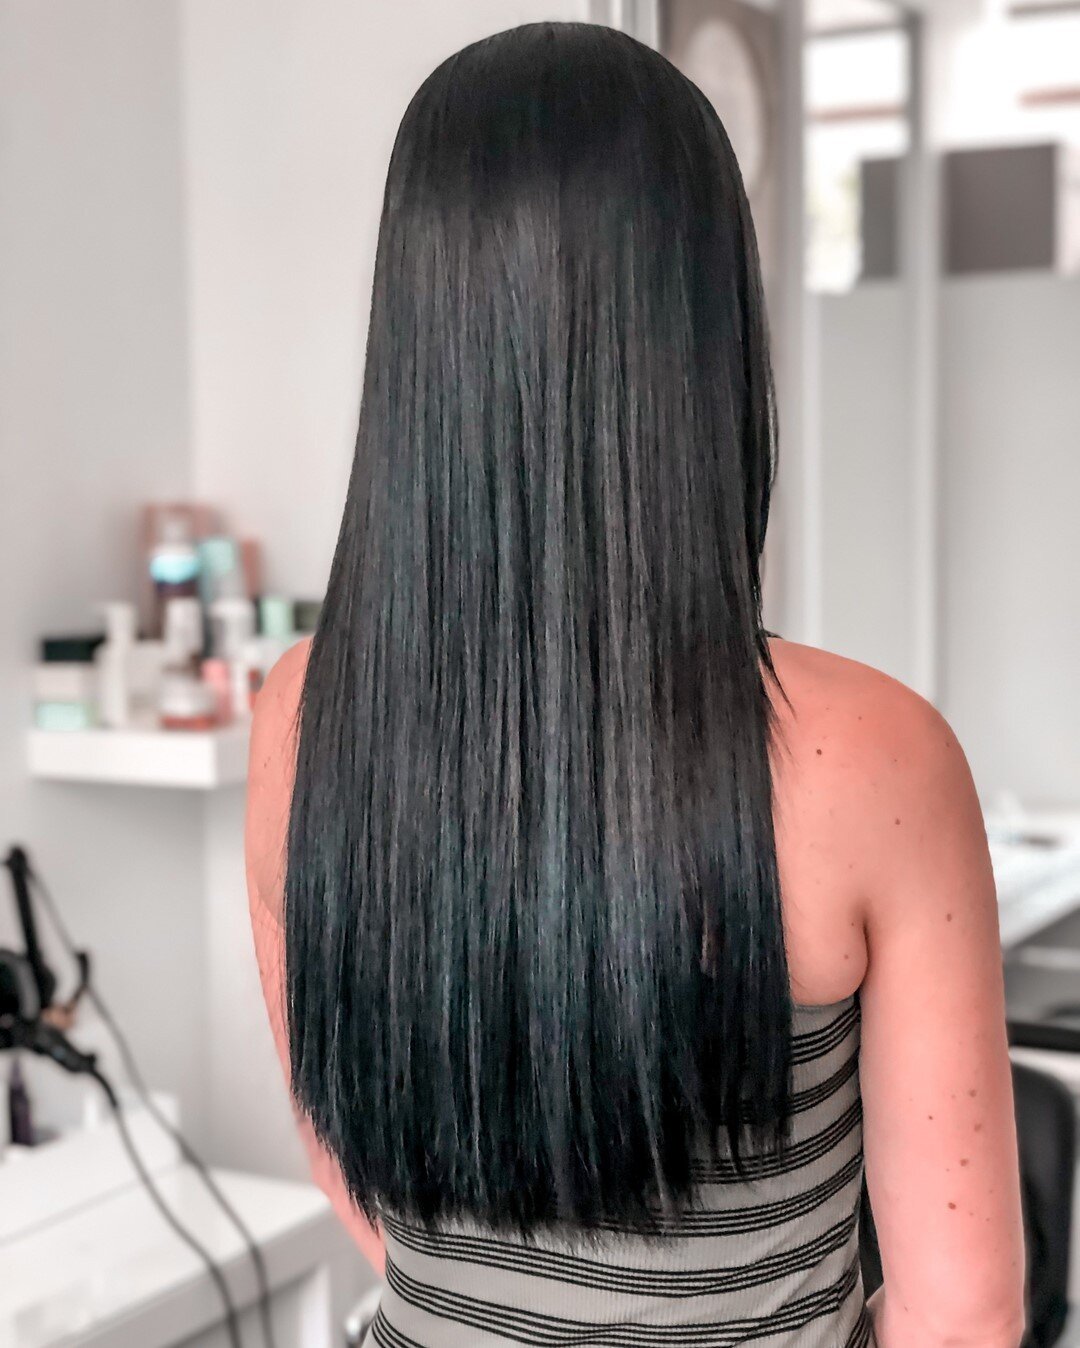 Are you frustrated with your extensions hurting or showing easily?⠀⠀⠀⠀⠀⠀⠀⠀⠀
⠀⠀⠀⠀⠀⠀⠀⠀⠀
If you have been wearing clip-ins or tape-ins come &amp; talk to us about trying hand-tied extensions!  These are an excellent option because they are applied stran